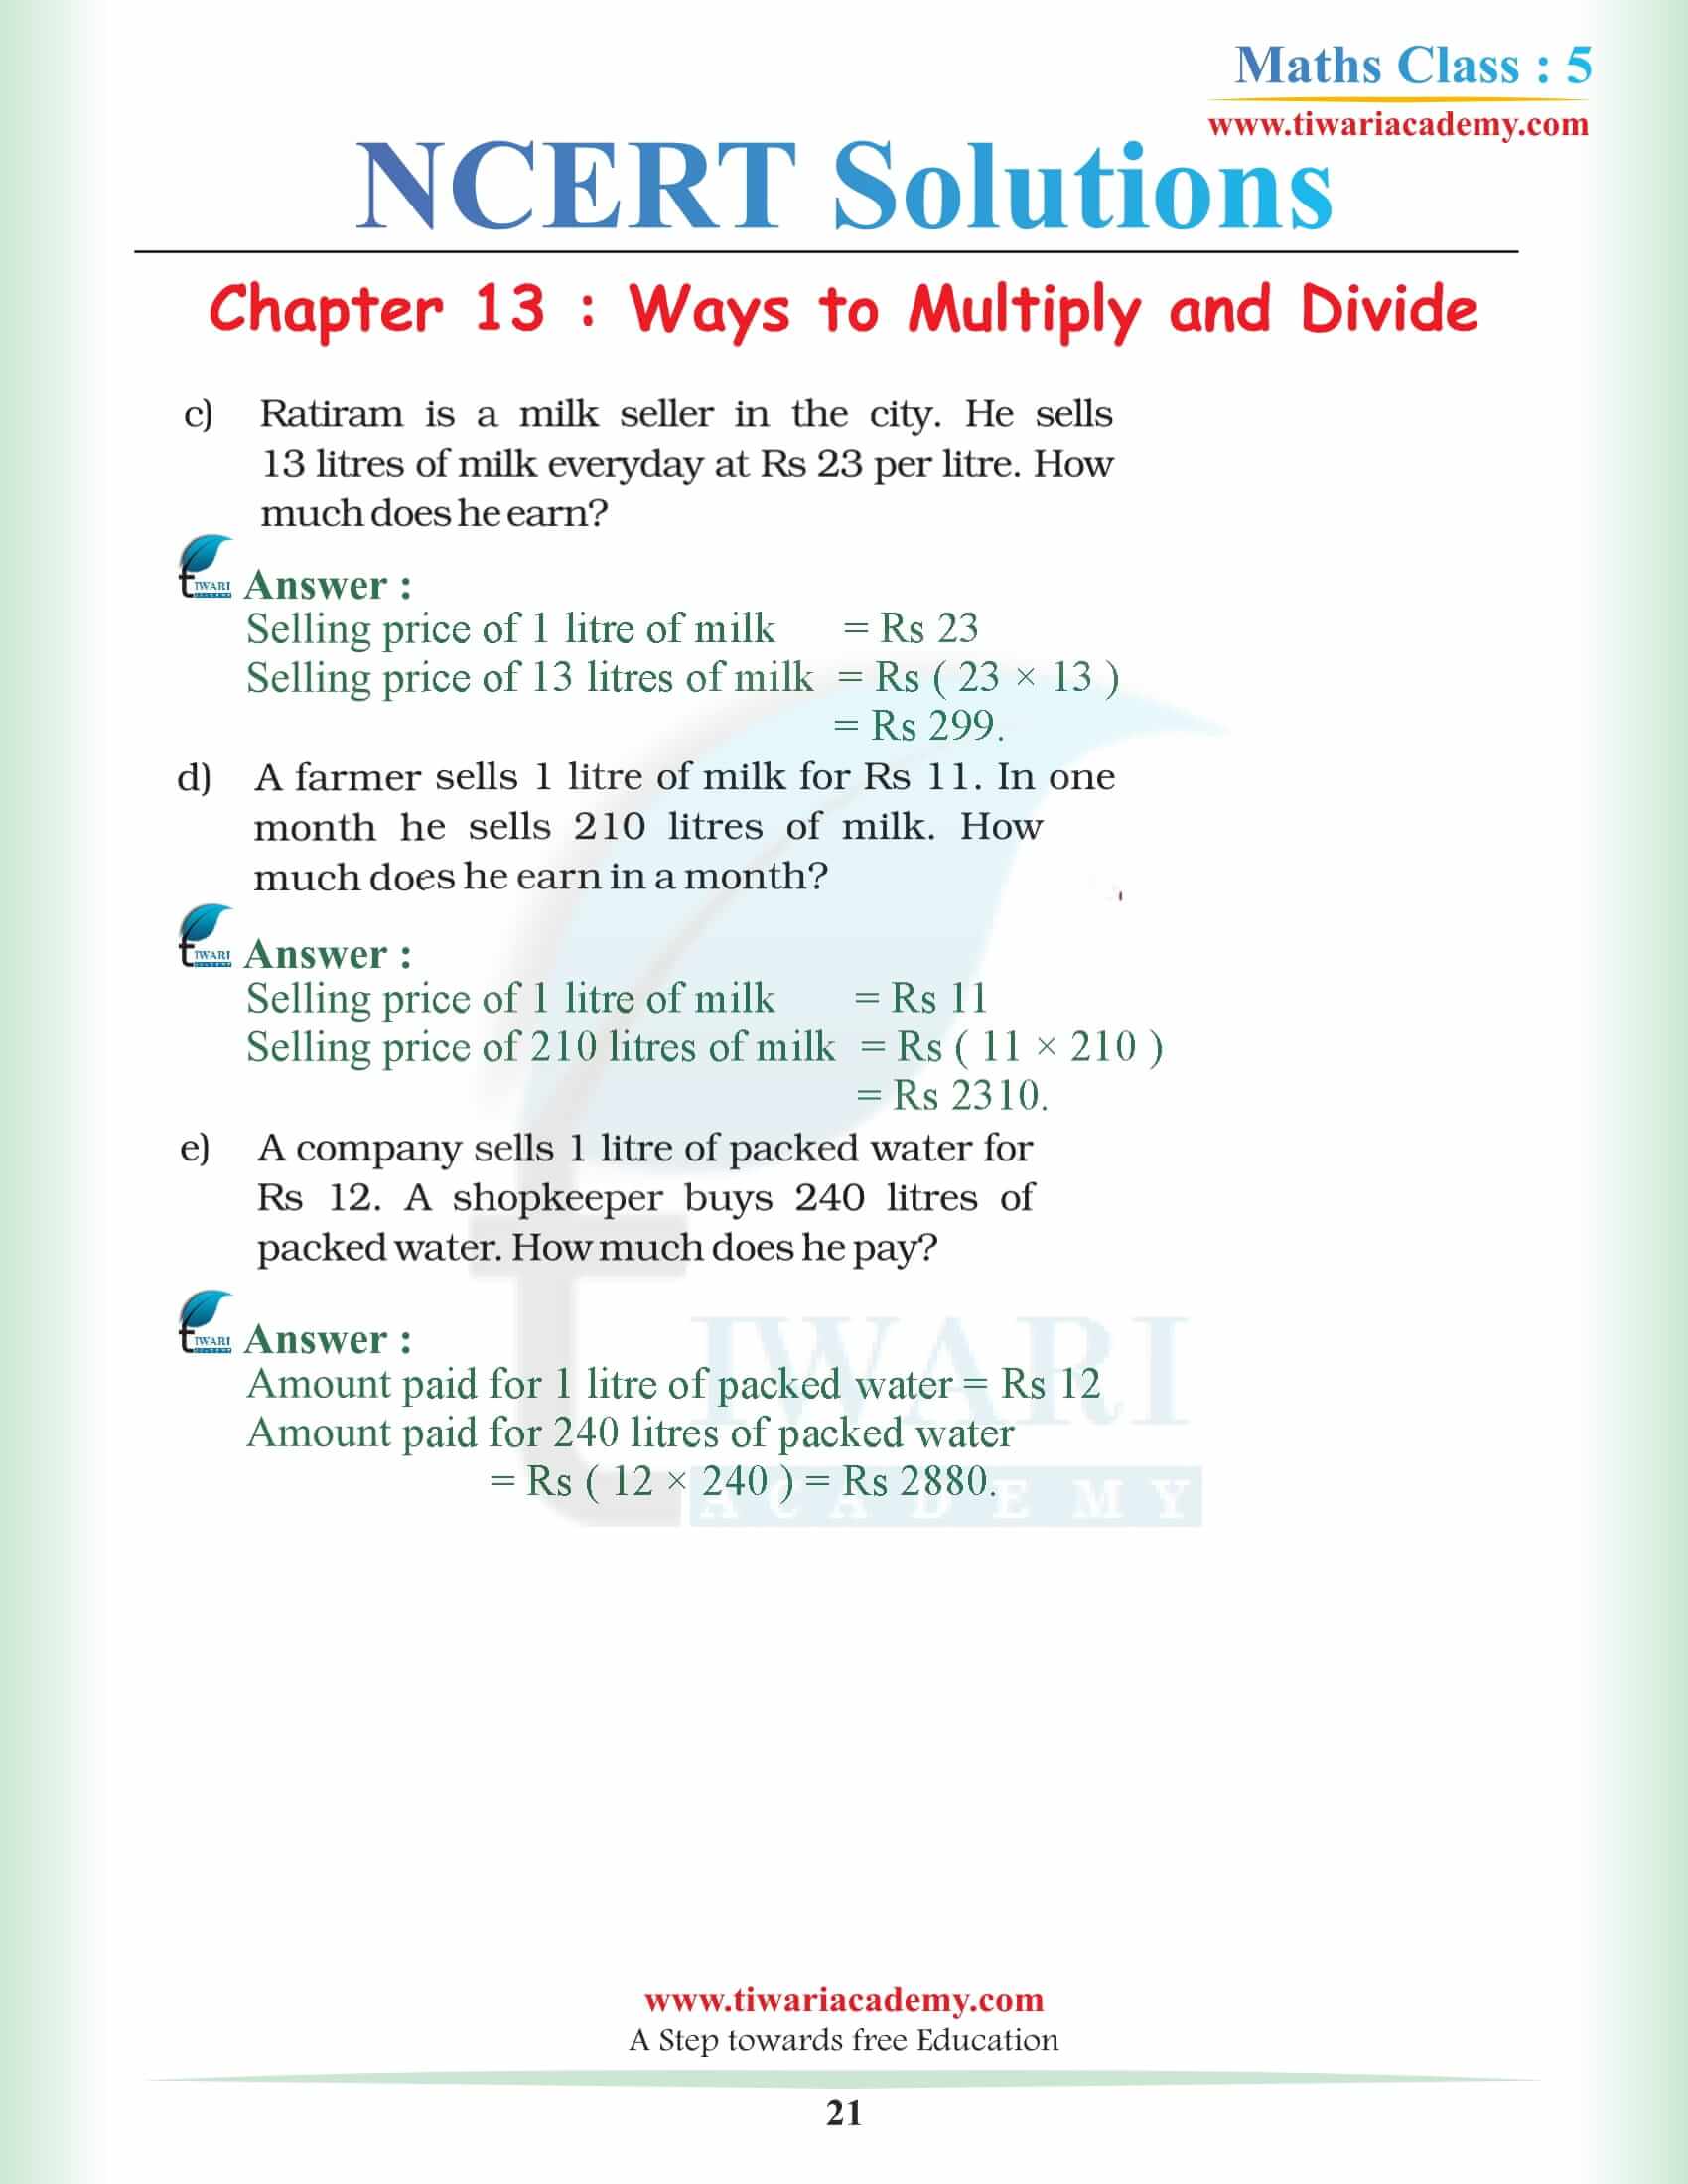 Grade 5 Math Magic NCERT Chapter 13 Solutions in English